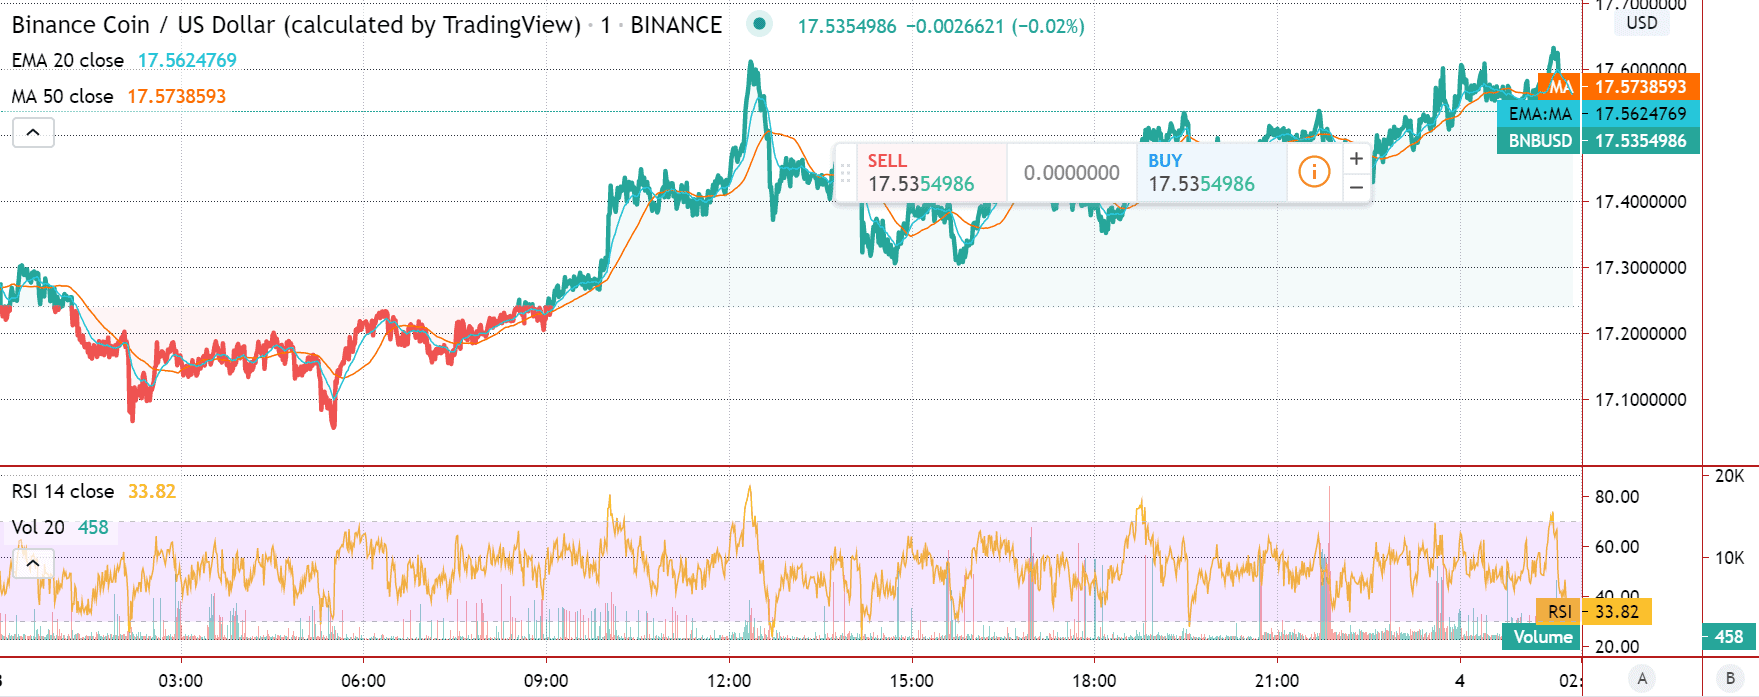 Binance Coin Price Featured Chart